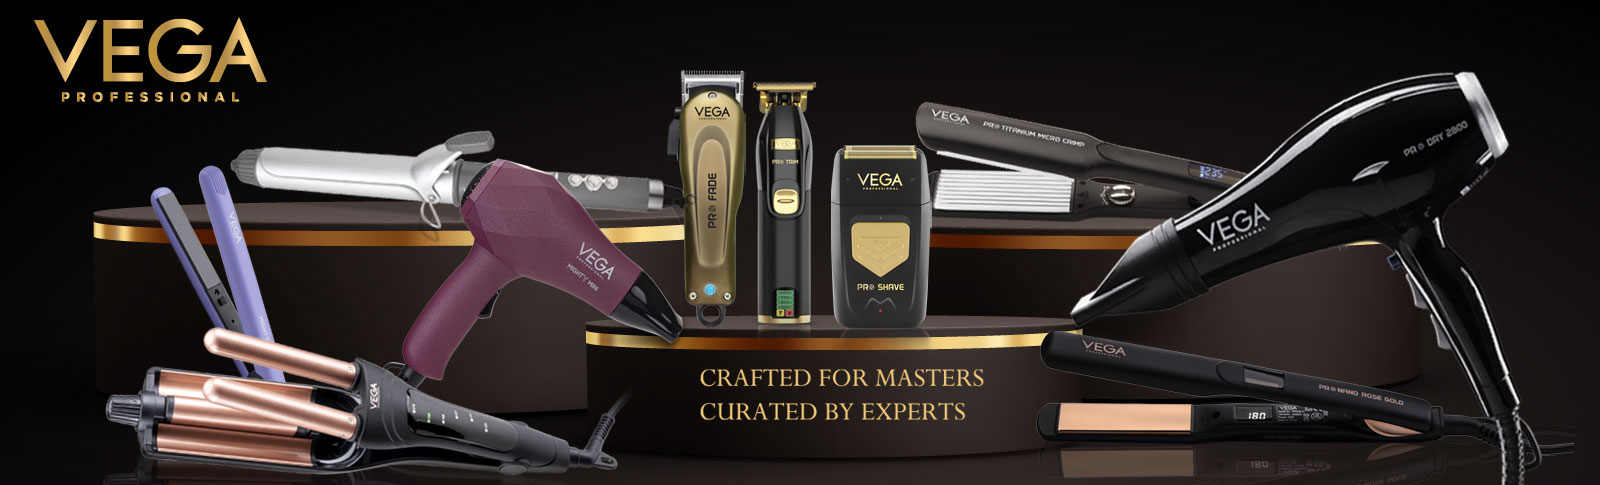 Crafted For Masters